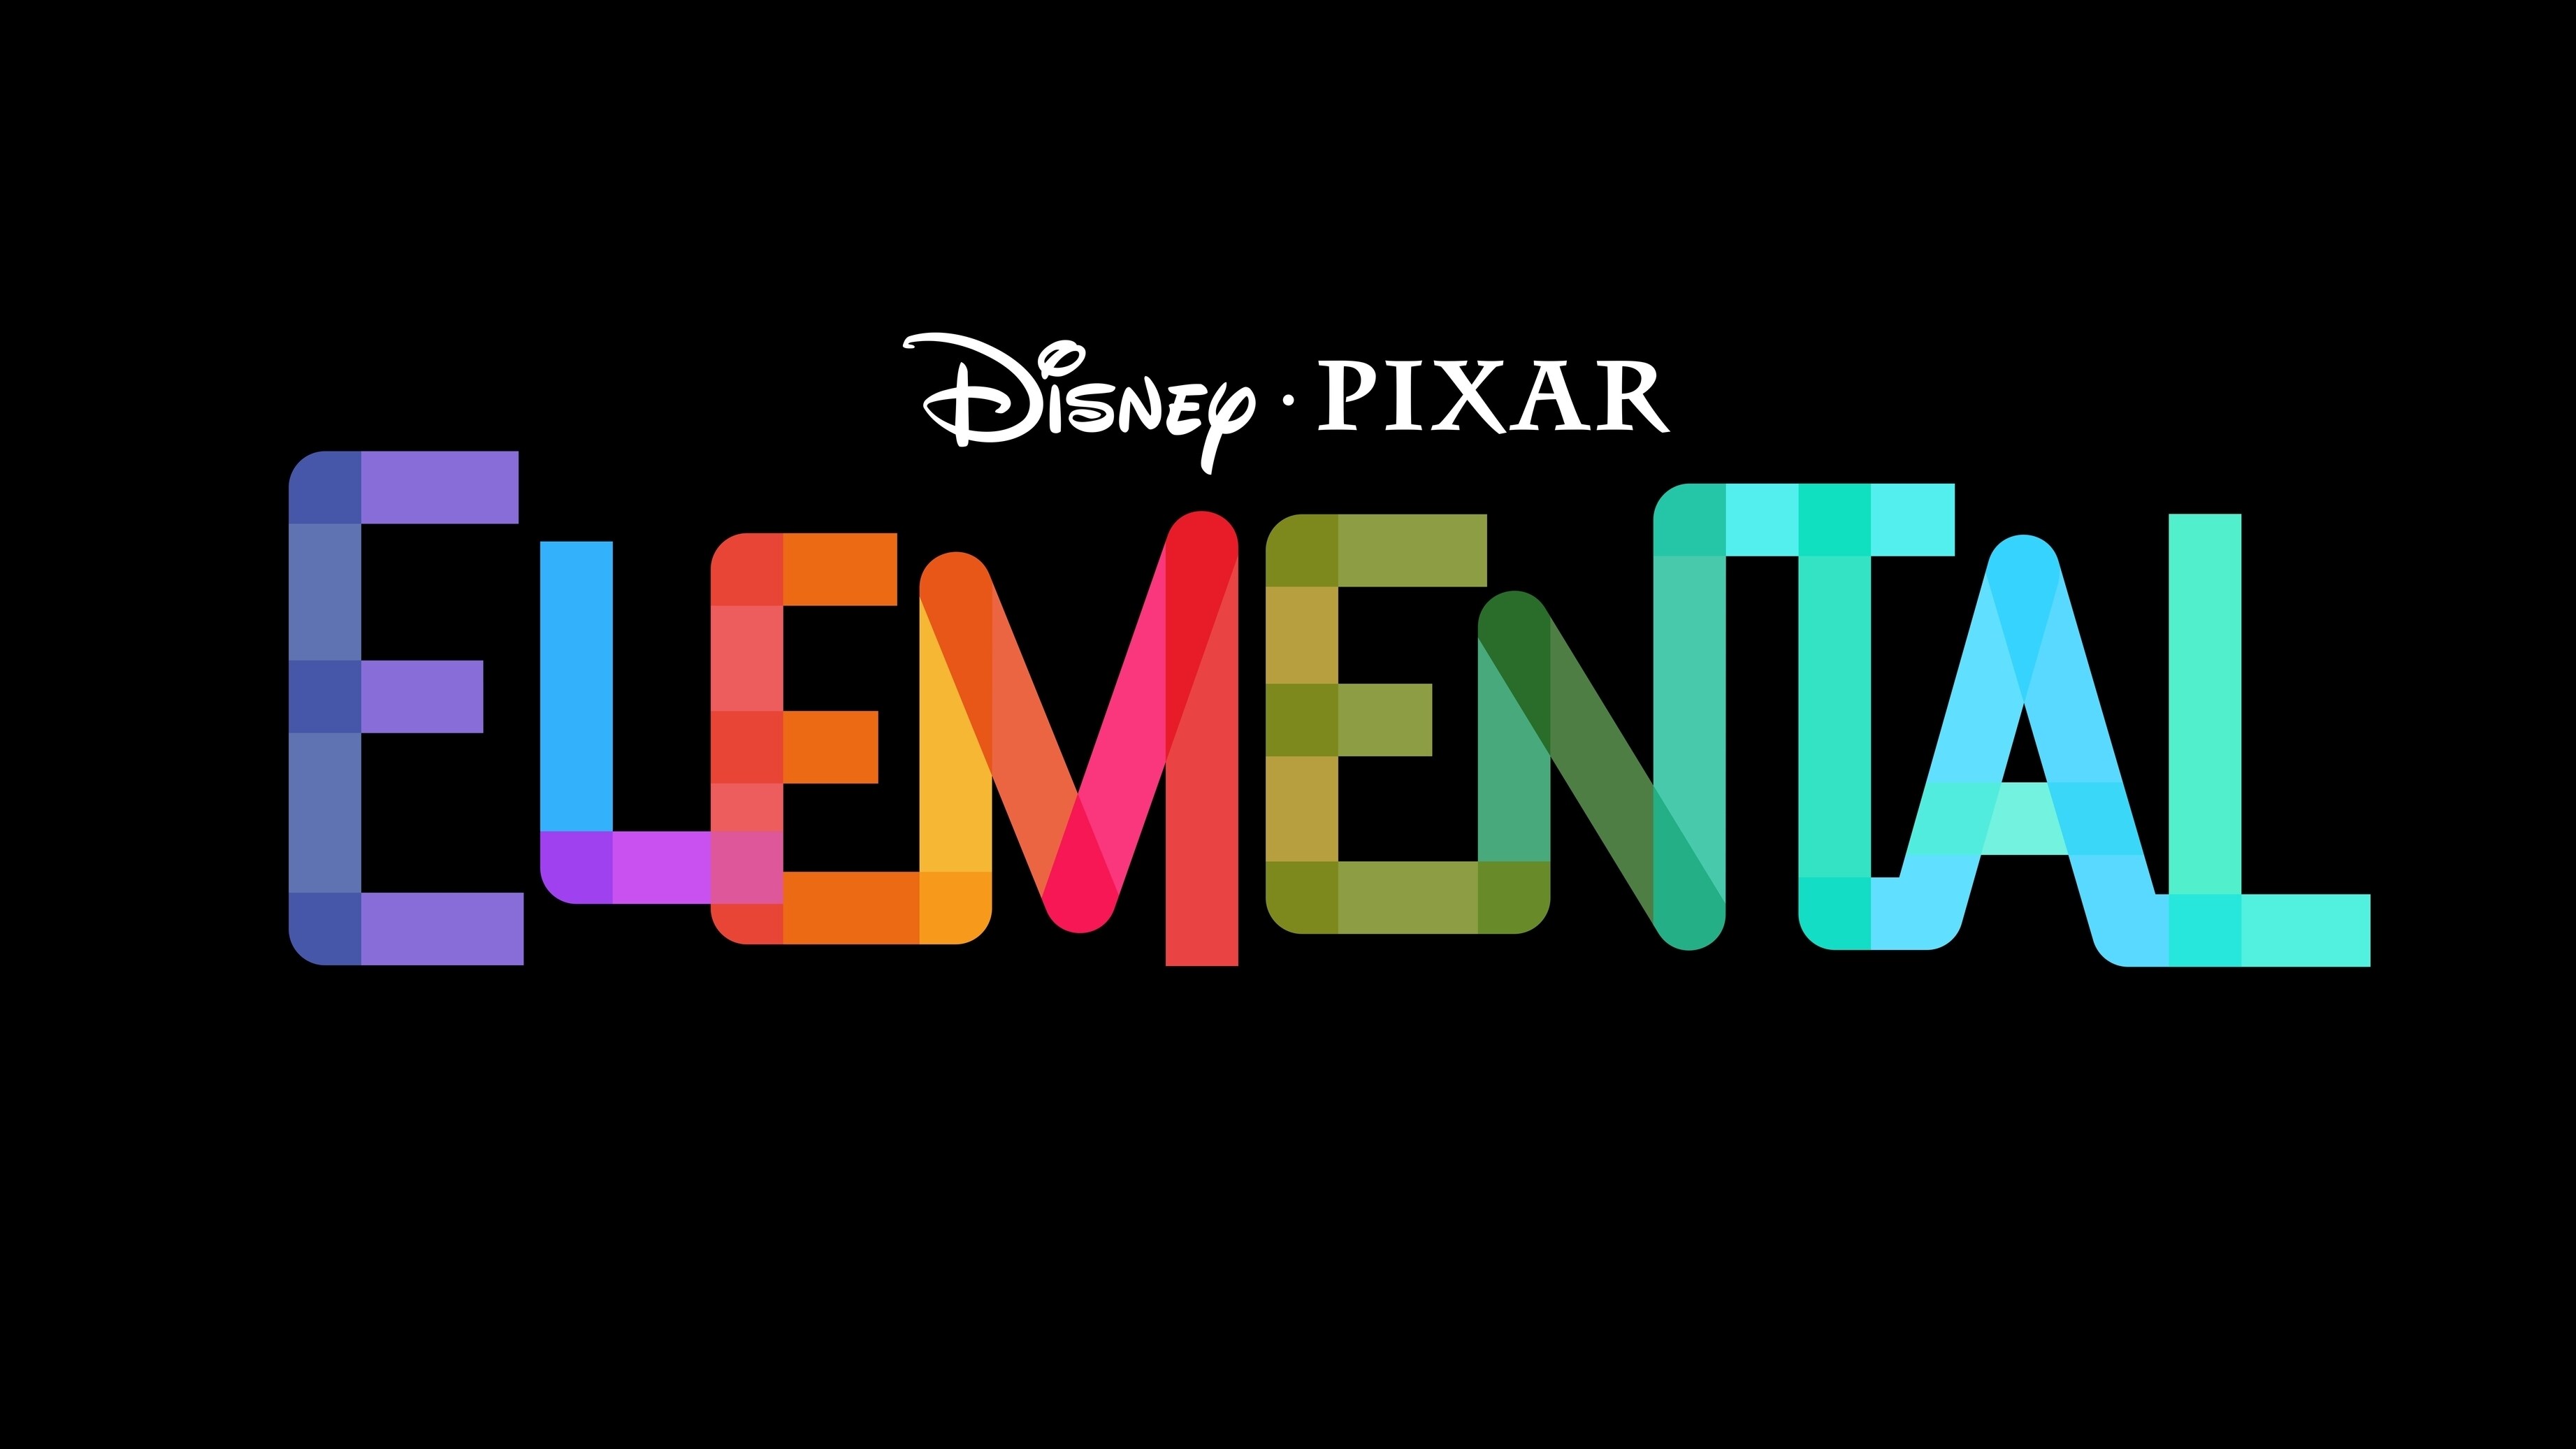 DETAILS REVEALED ABOUT DISNEY AND PIXAR’S “ELEMENTAL” – Concept Art Now Available